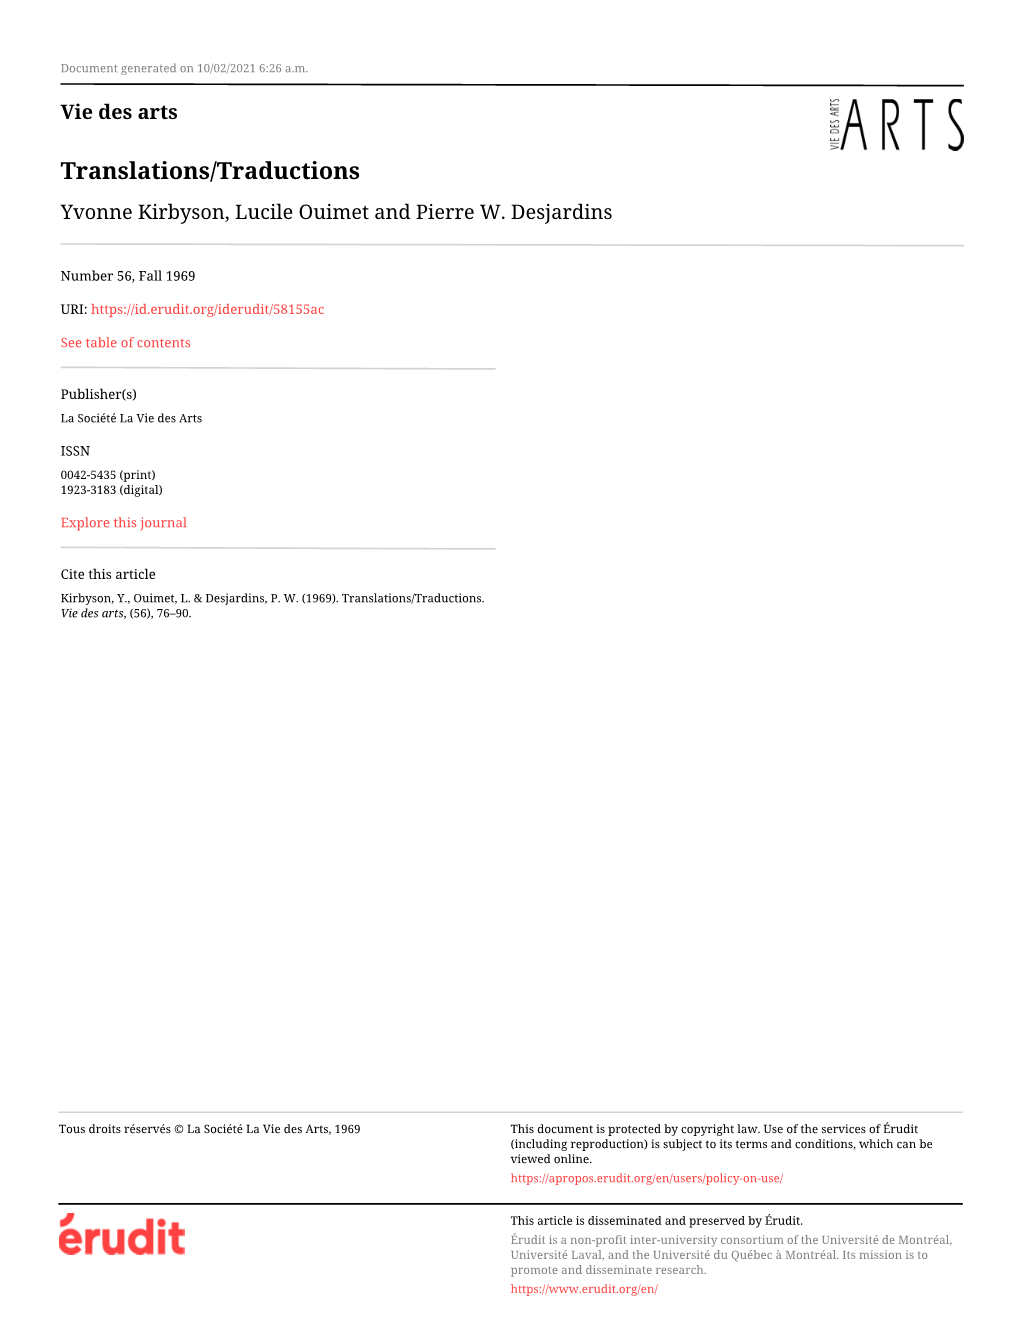 Translations/Traductions Yvonne Kirbyson, Lucile Ouimet and Pierre W